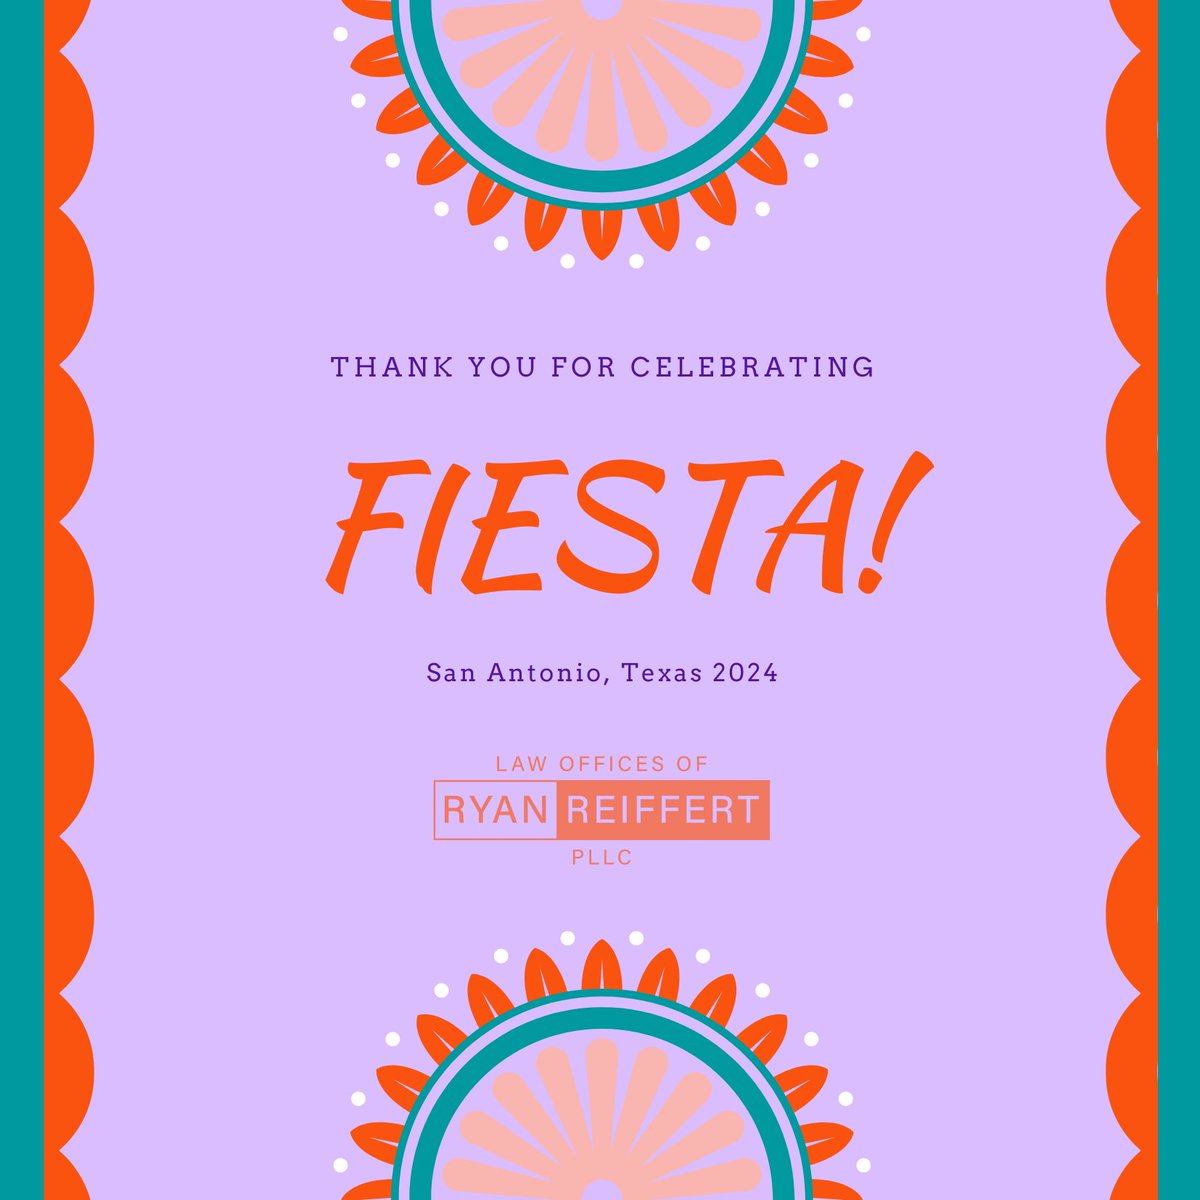 What a great year for Fiesta!  We hope you had fun!  What was your favorite event?  🪅
#fiesta2024 #sanantoniofiesta2024

#lawofficesofryanreiffert #lawyer #sanantoniolawyer #sanmarcoslawyer #texas #texaslawyer #sanantonio #estateplanning #business !